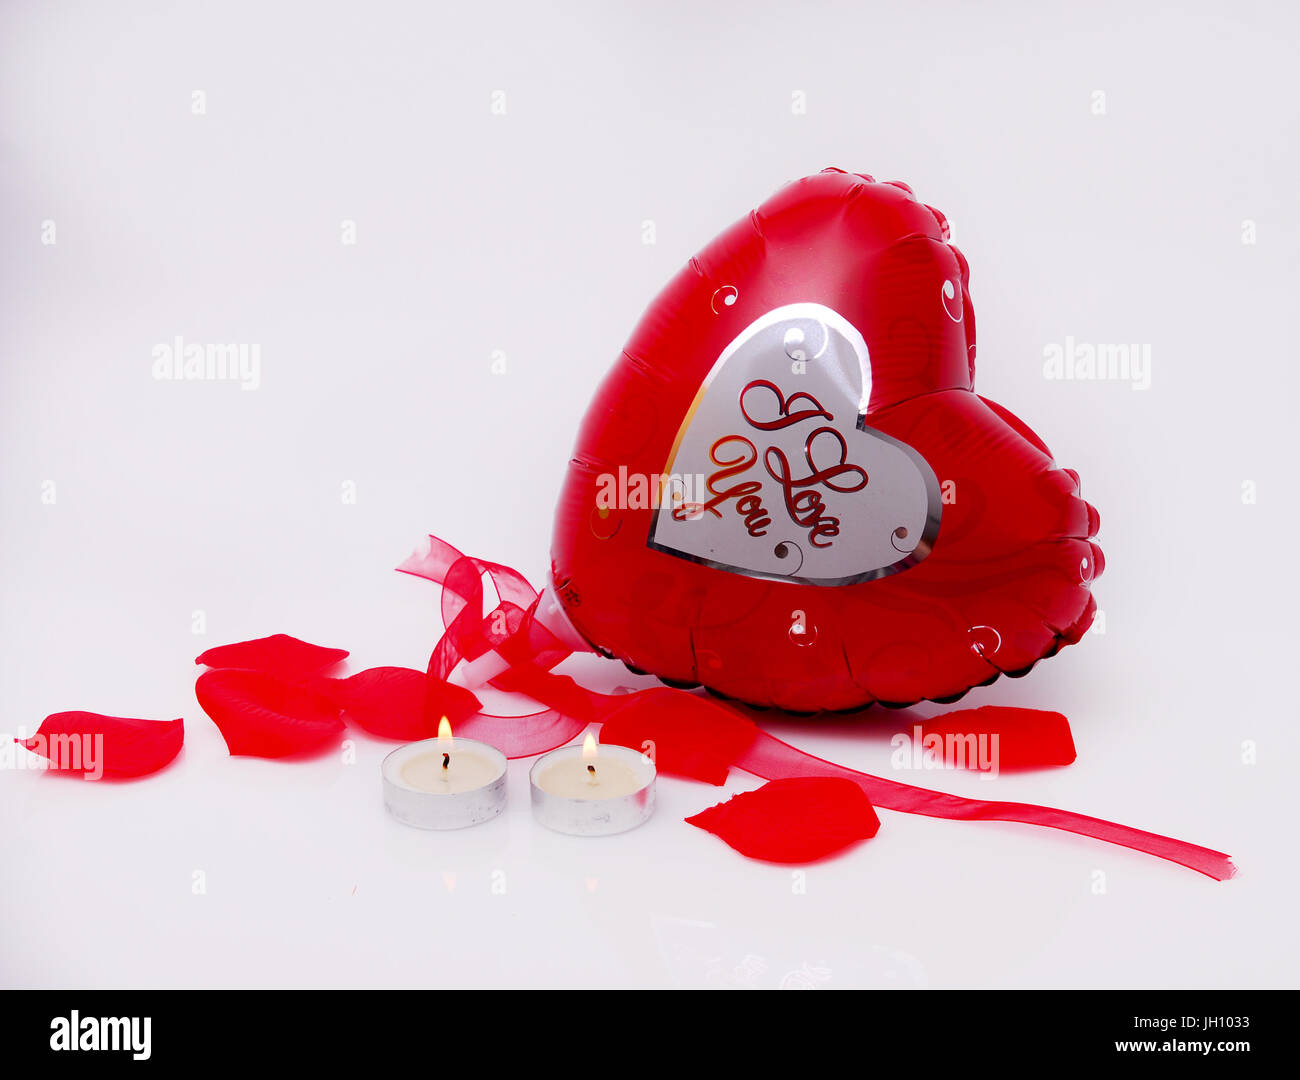 valentines day heart balloon, pedals and candles Stock Photo